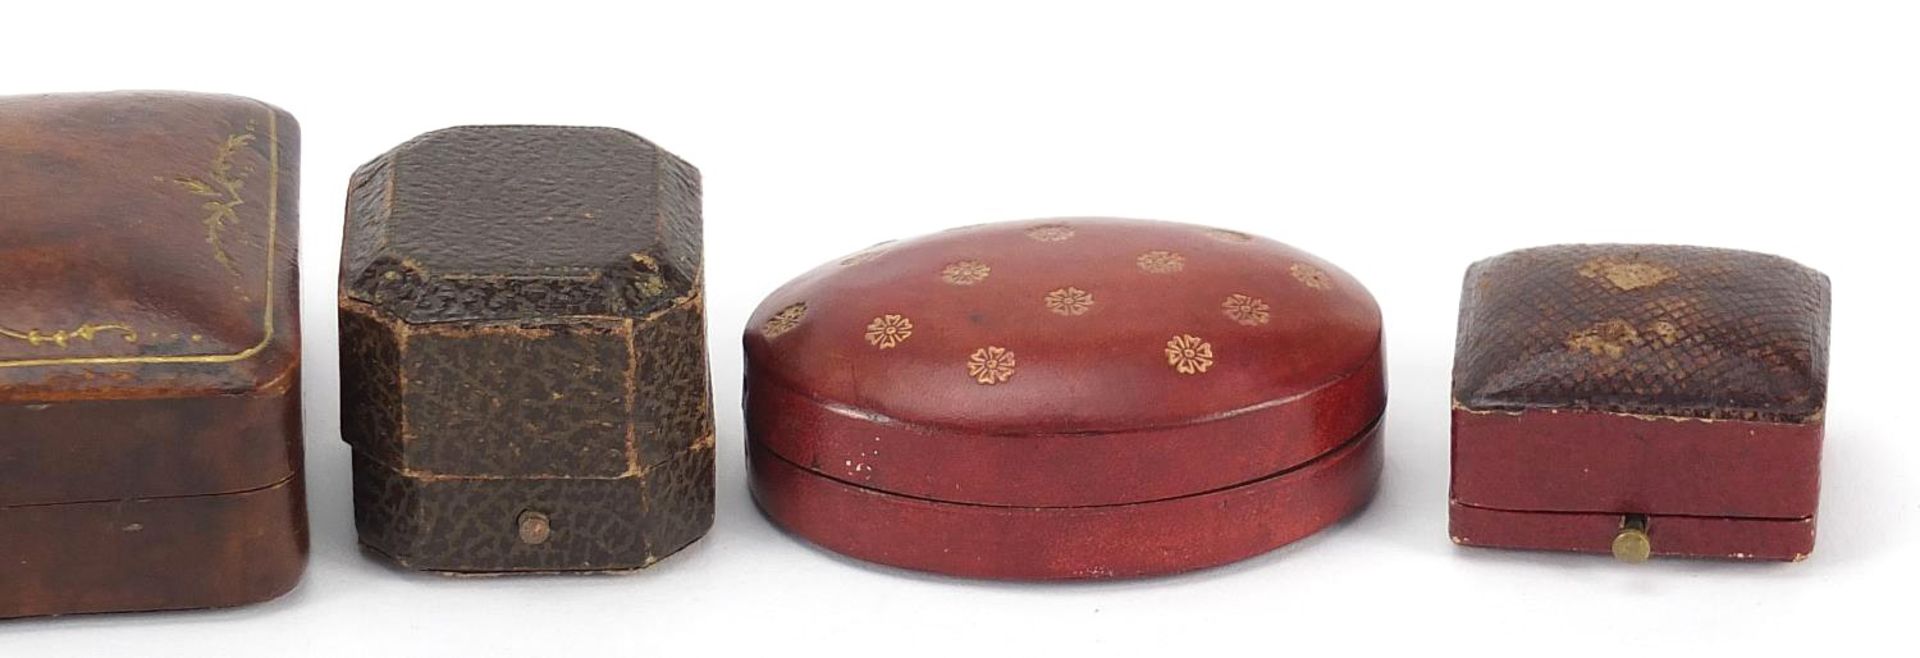 Jewellery boxes including ring boxes and Italian tooled leather, the largest 10cm wide - Image 3 of 5